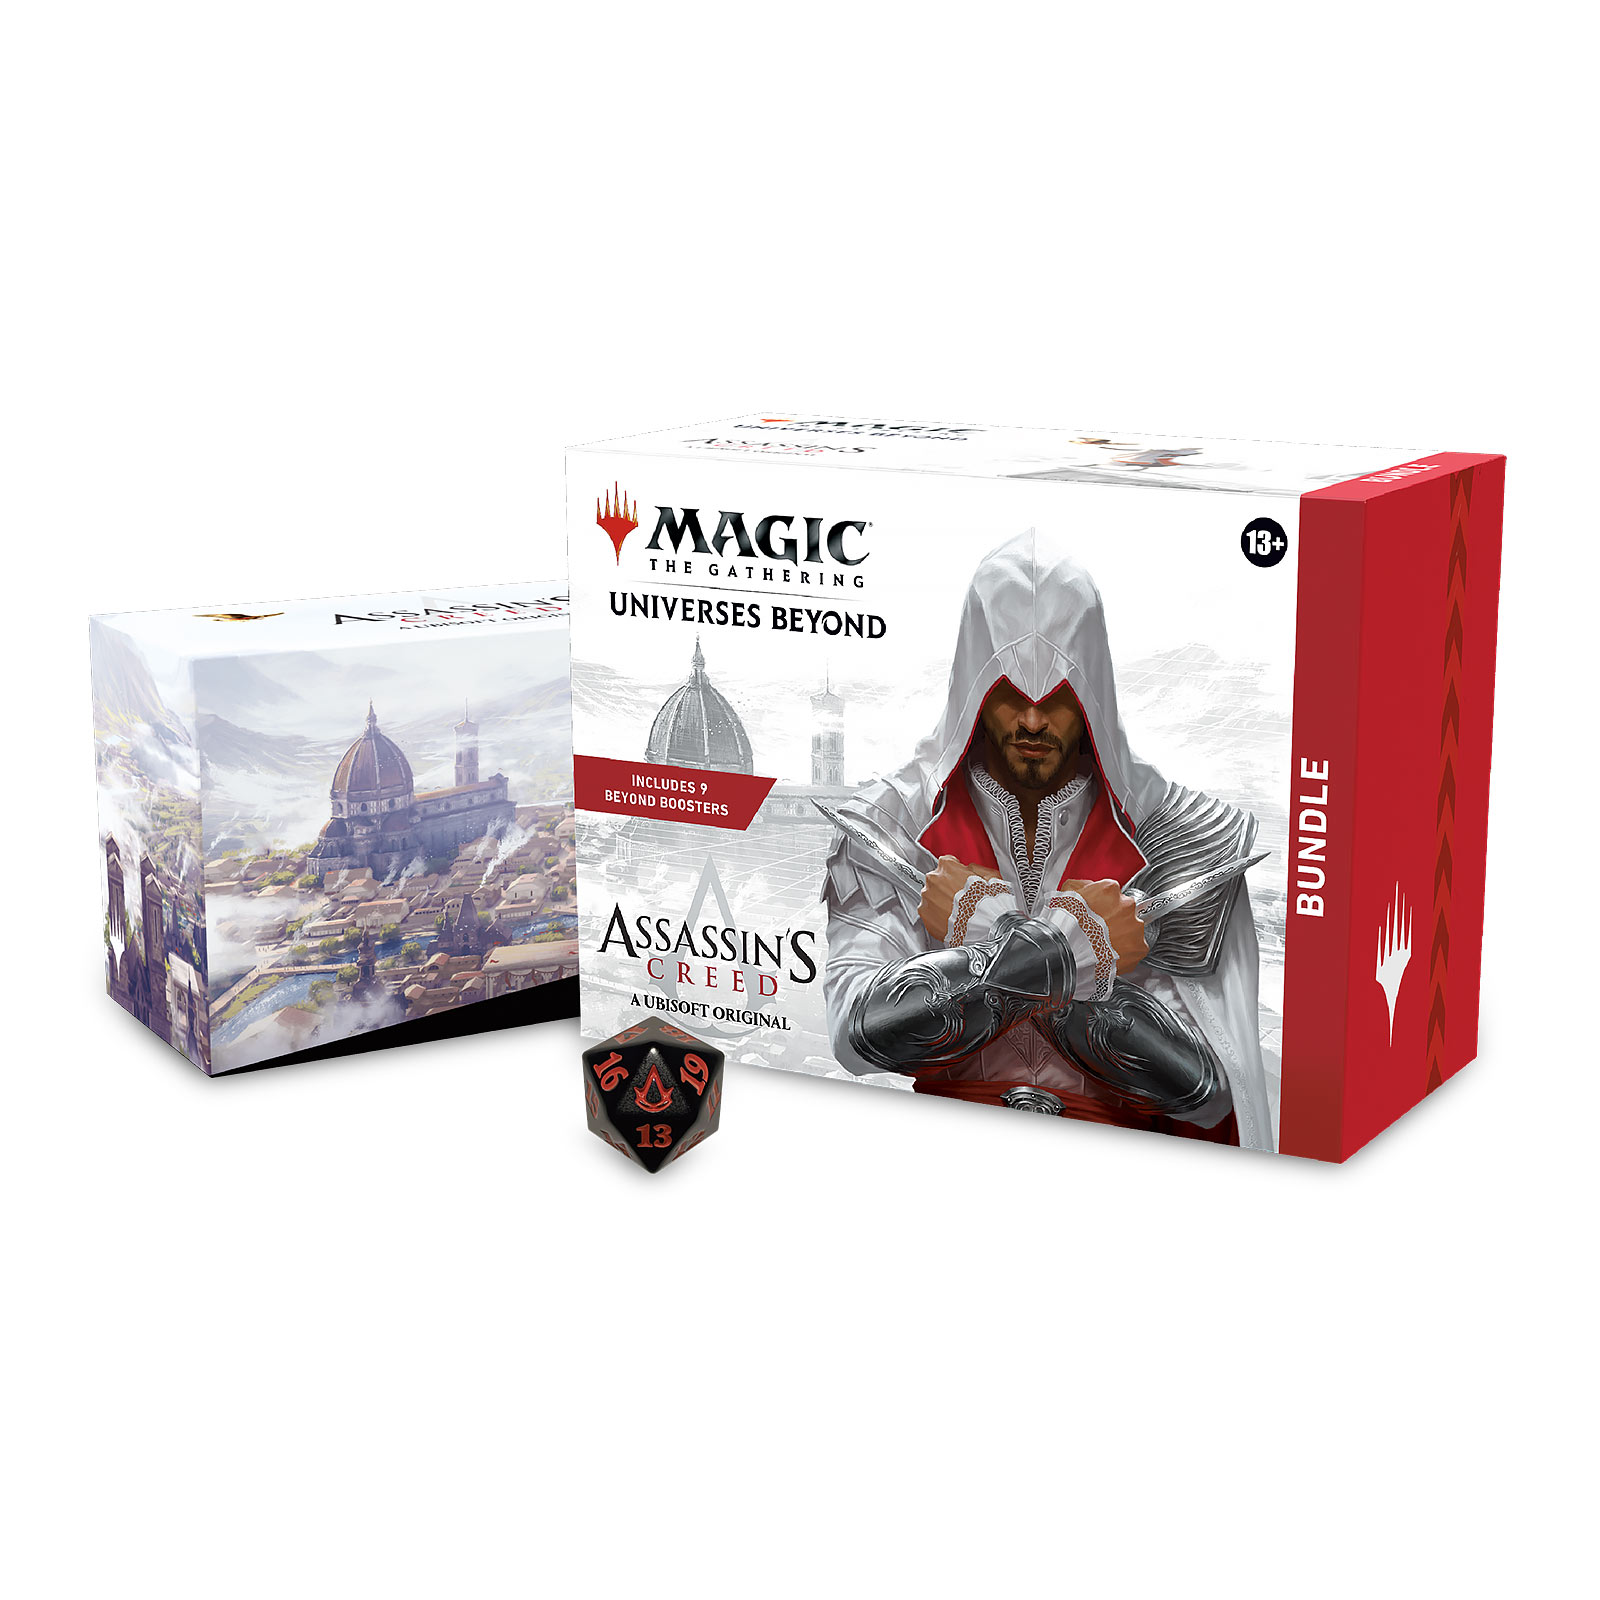 Assassin's Creed Bundle englische Version - Magic The Gathering